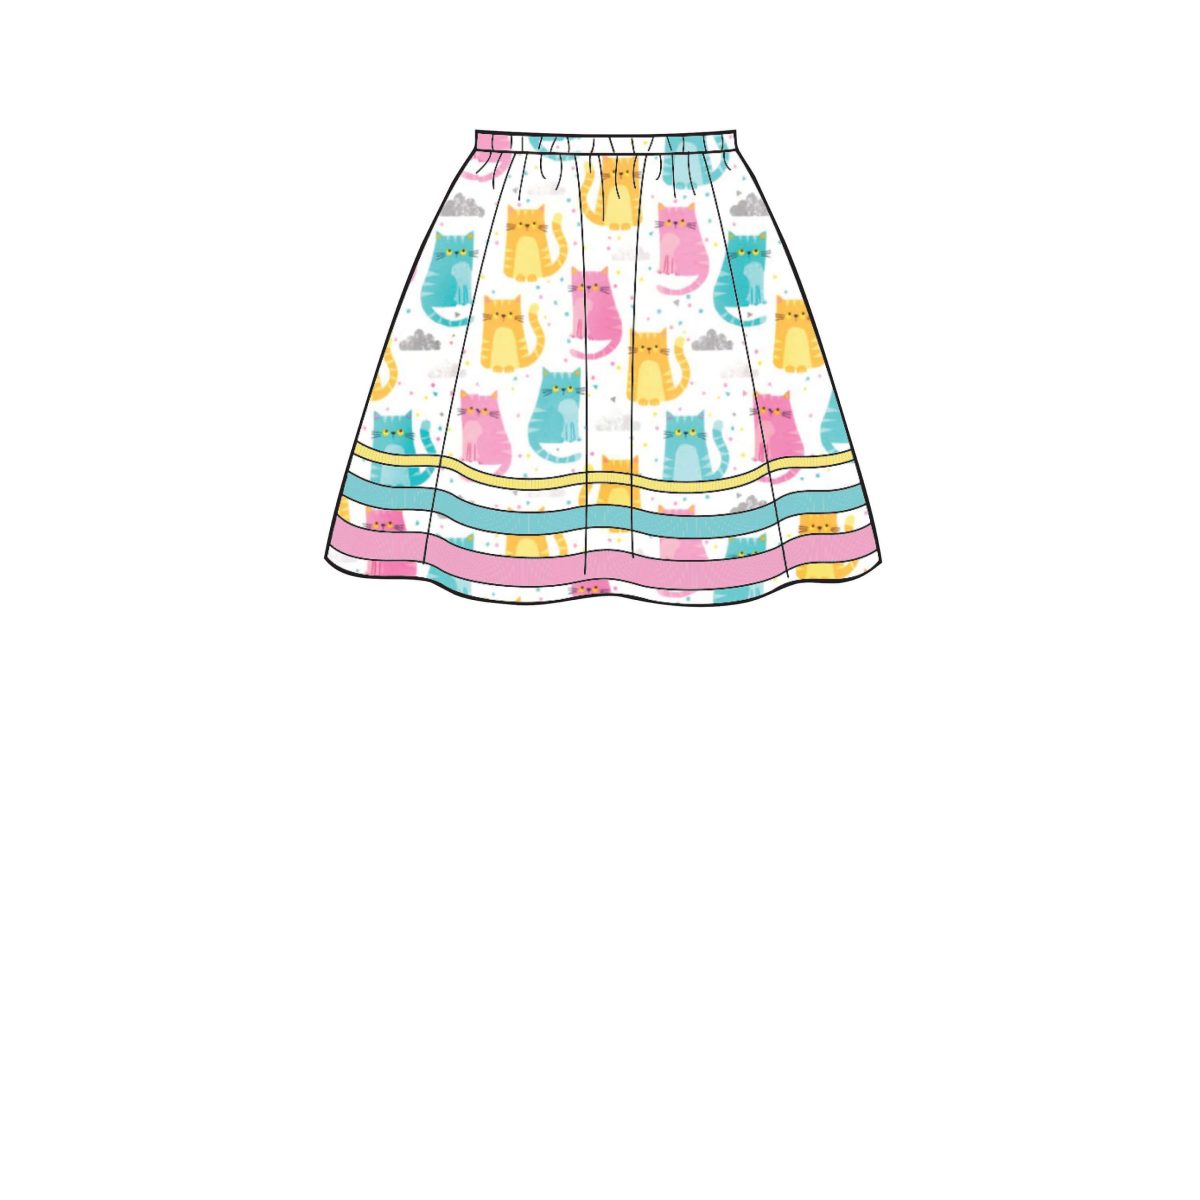 Simplicity Sewing Pattern S8961 Children's, Girls', and Dolls' Skirts